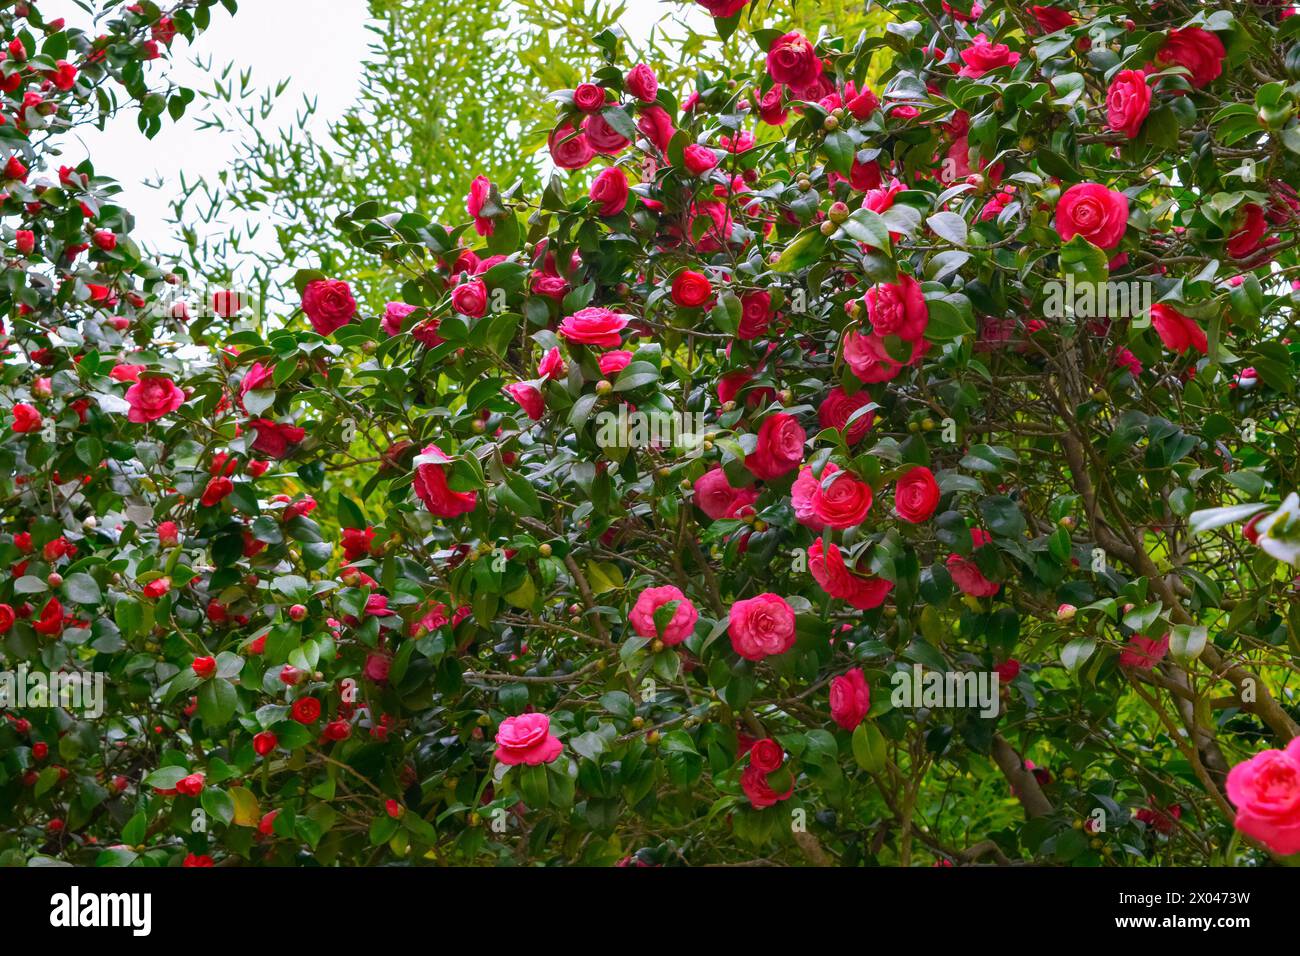 Red Camellia japonica flowers in the garden. common camellia, Japanese camellia. Floral background. Spring bloom. Stock Photo